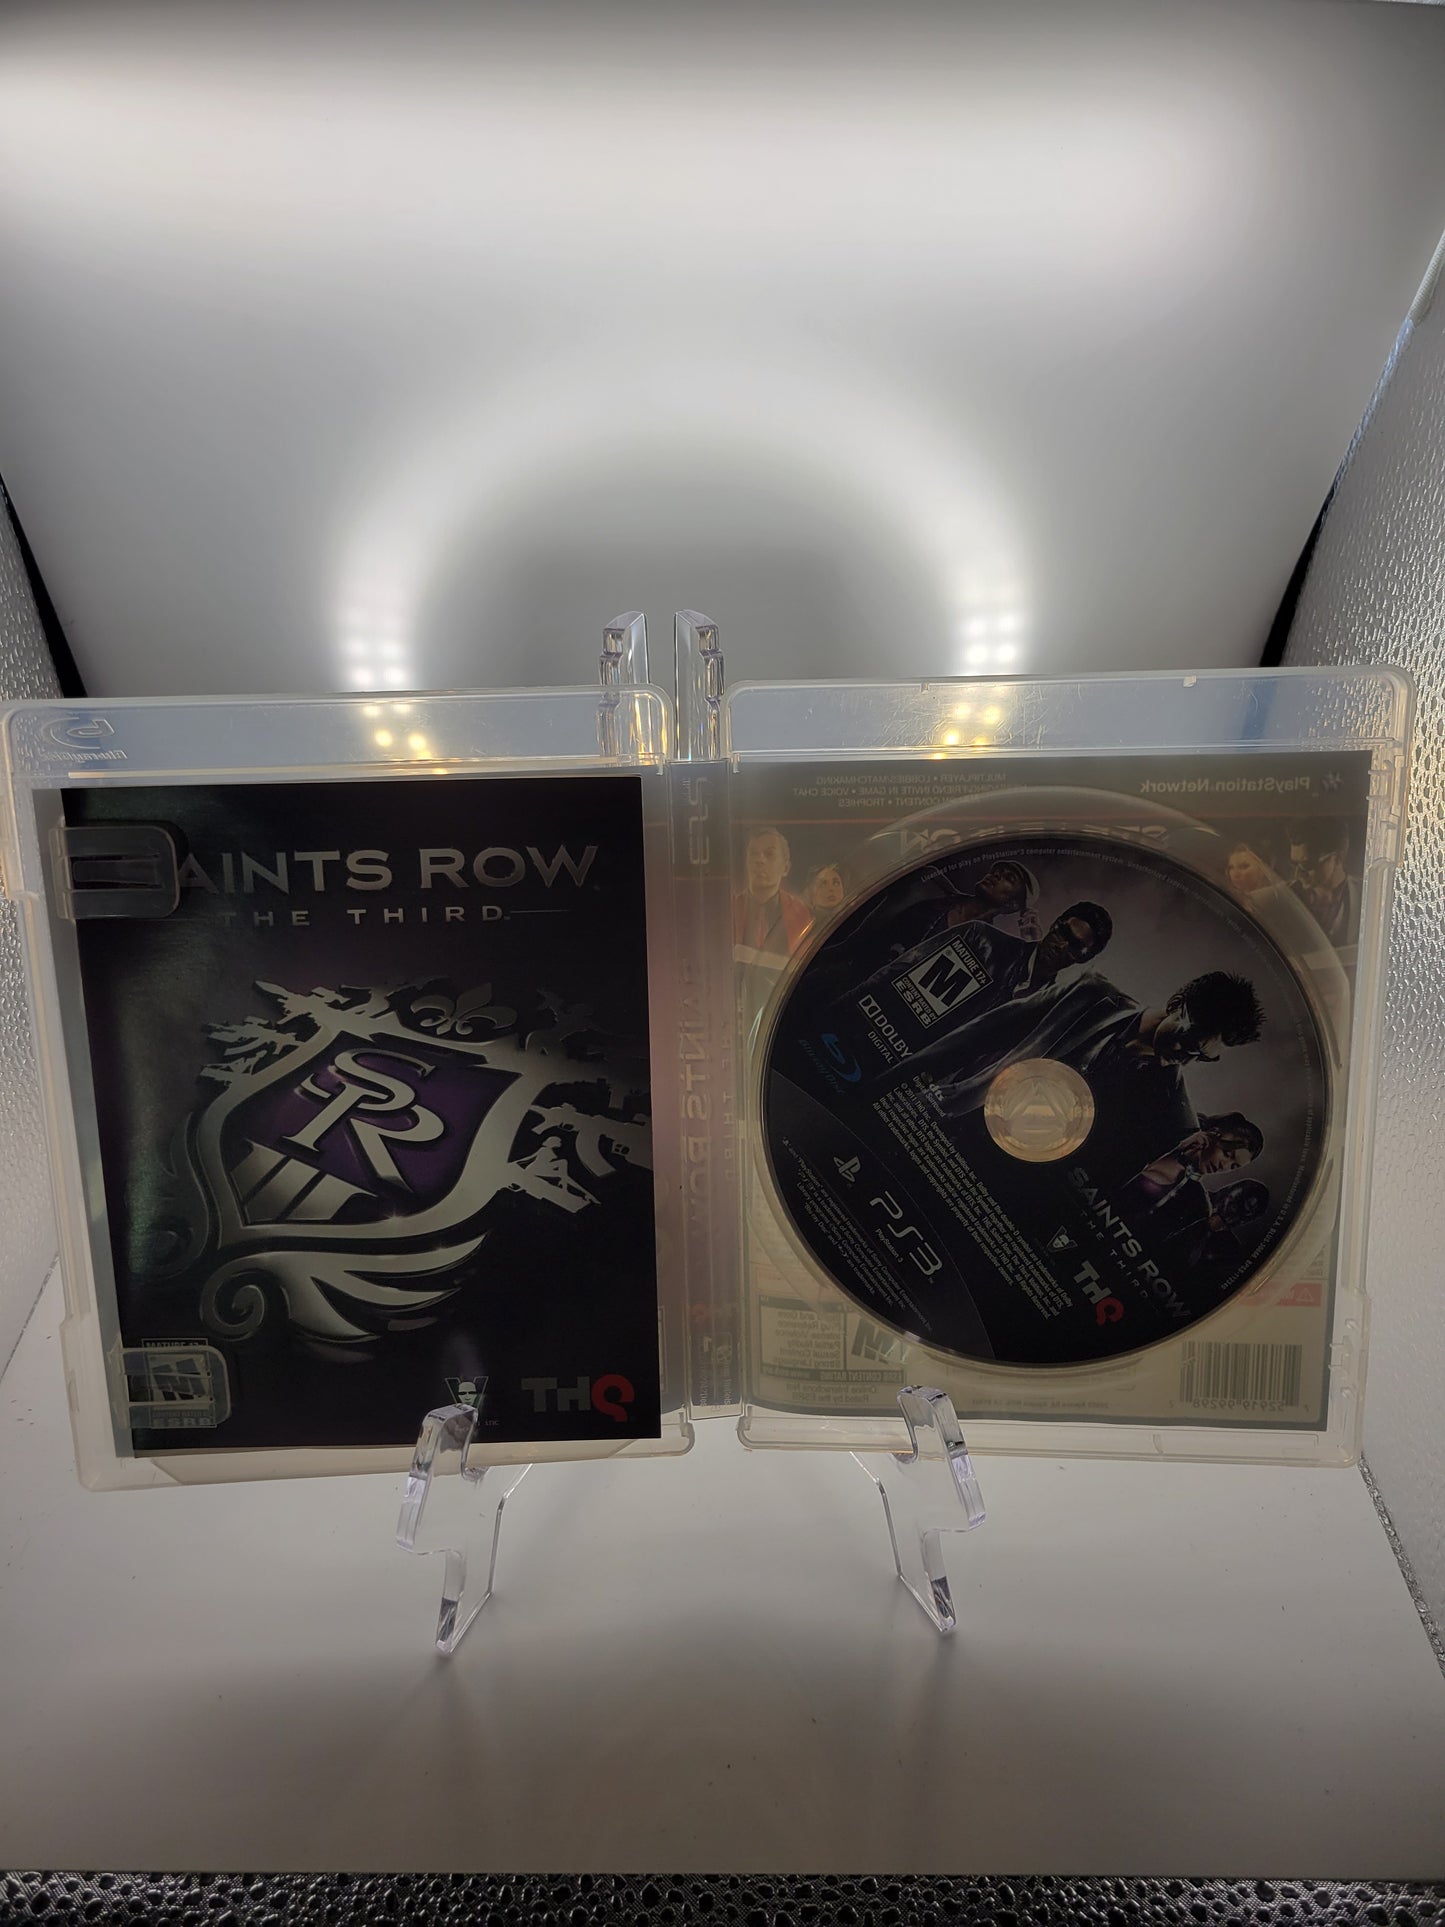 Sony Playstation 3 Saints Row The Third Video Game